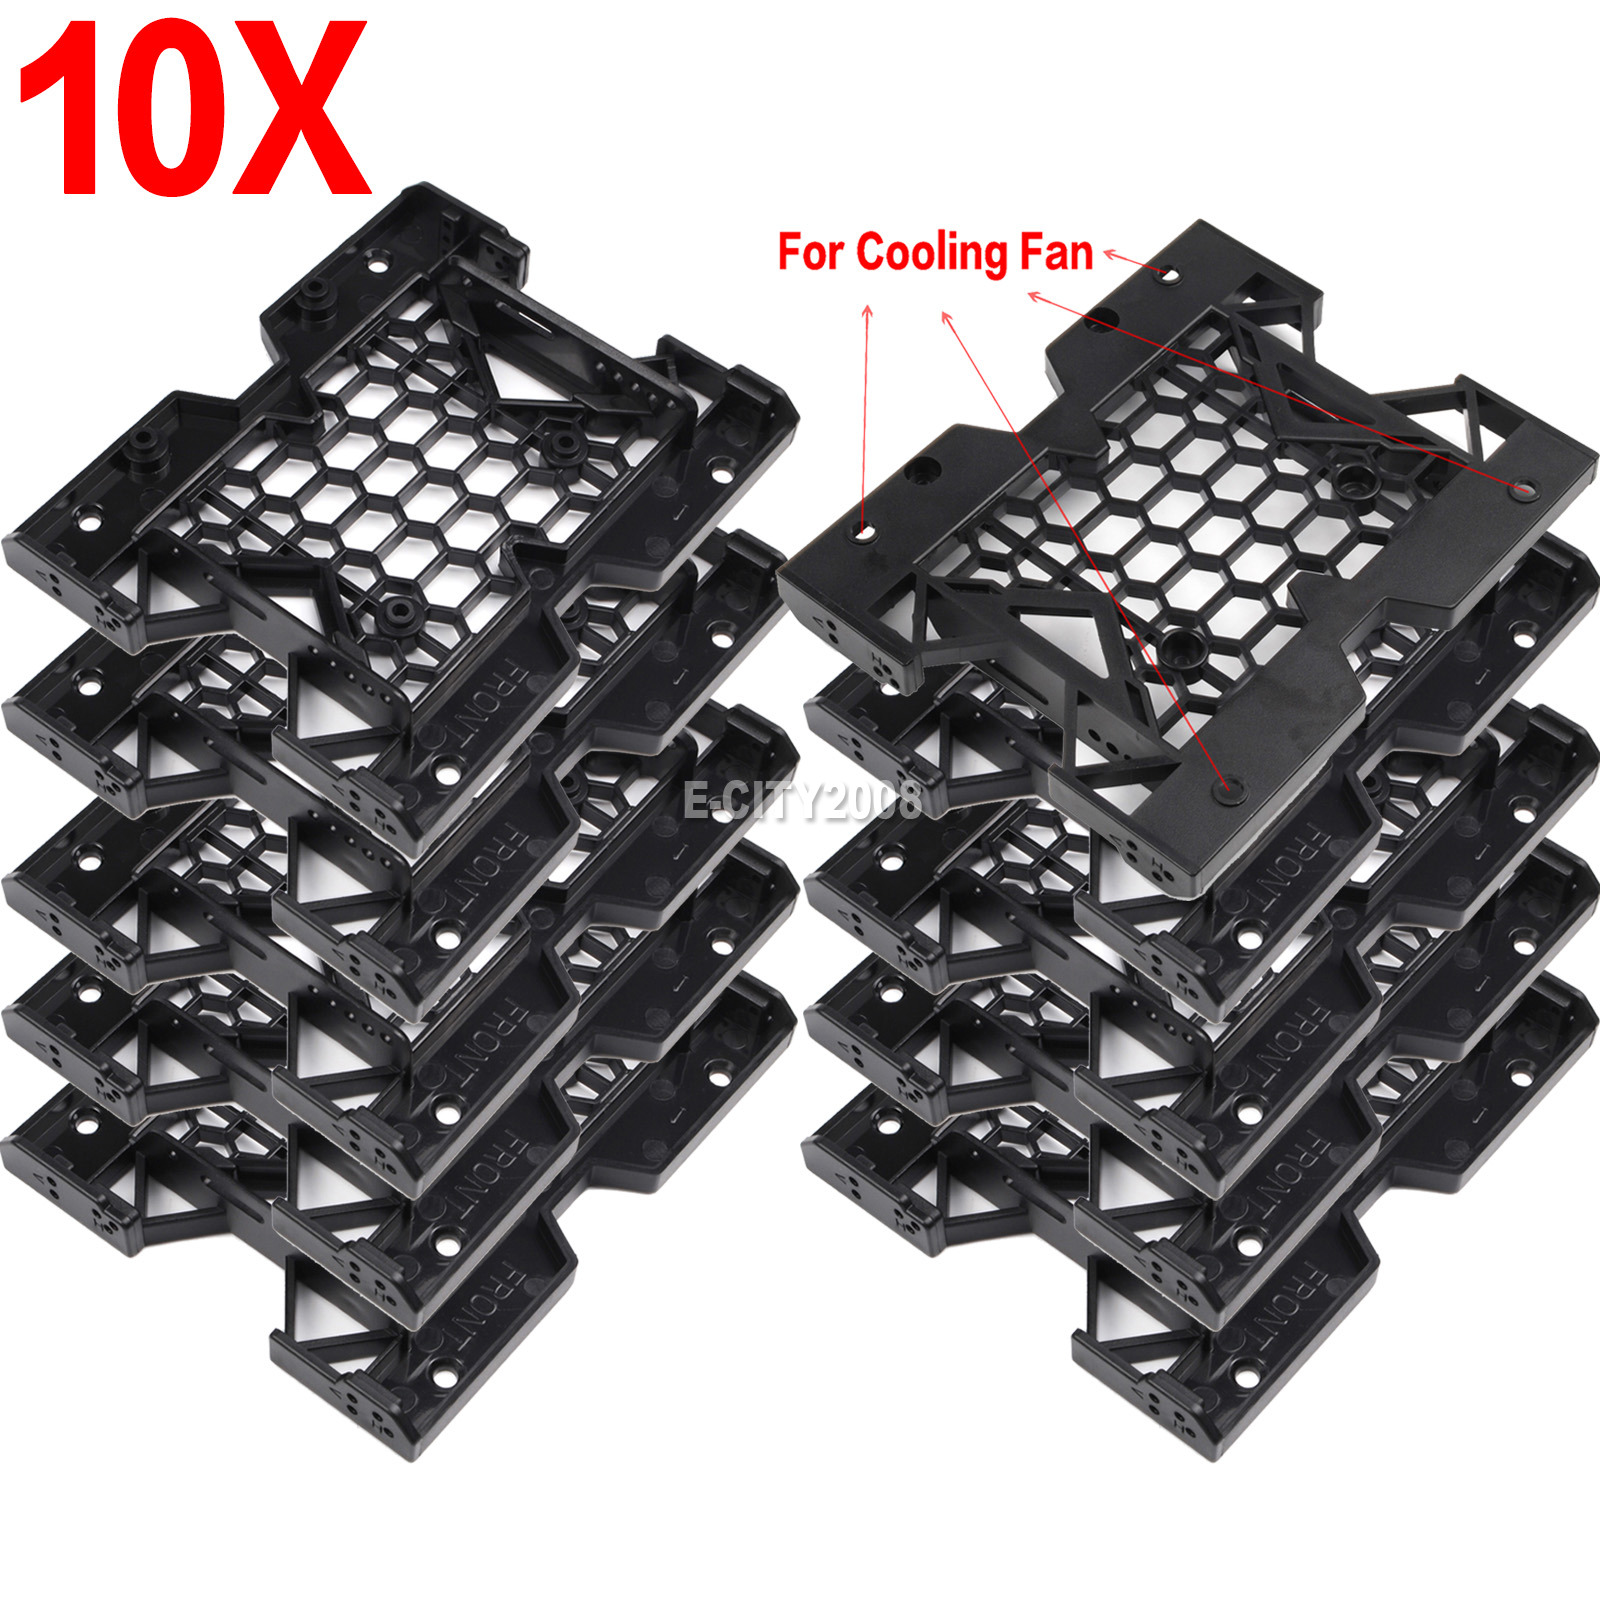 10pcs 2.5/3.5 to 5.25in Drive Bay Computer Case Adapter HDD Mounting Bracket SSD